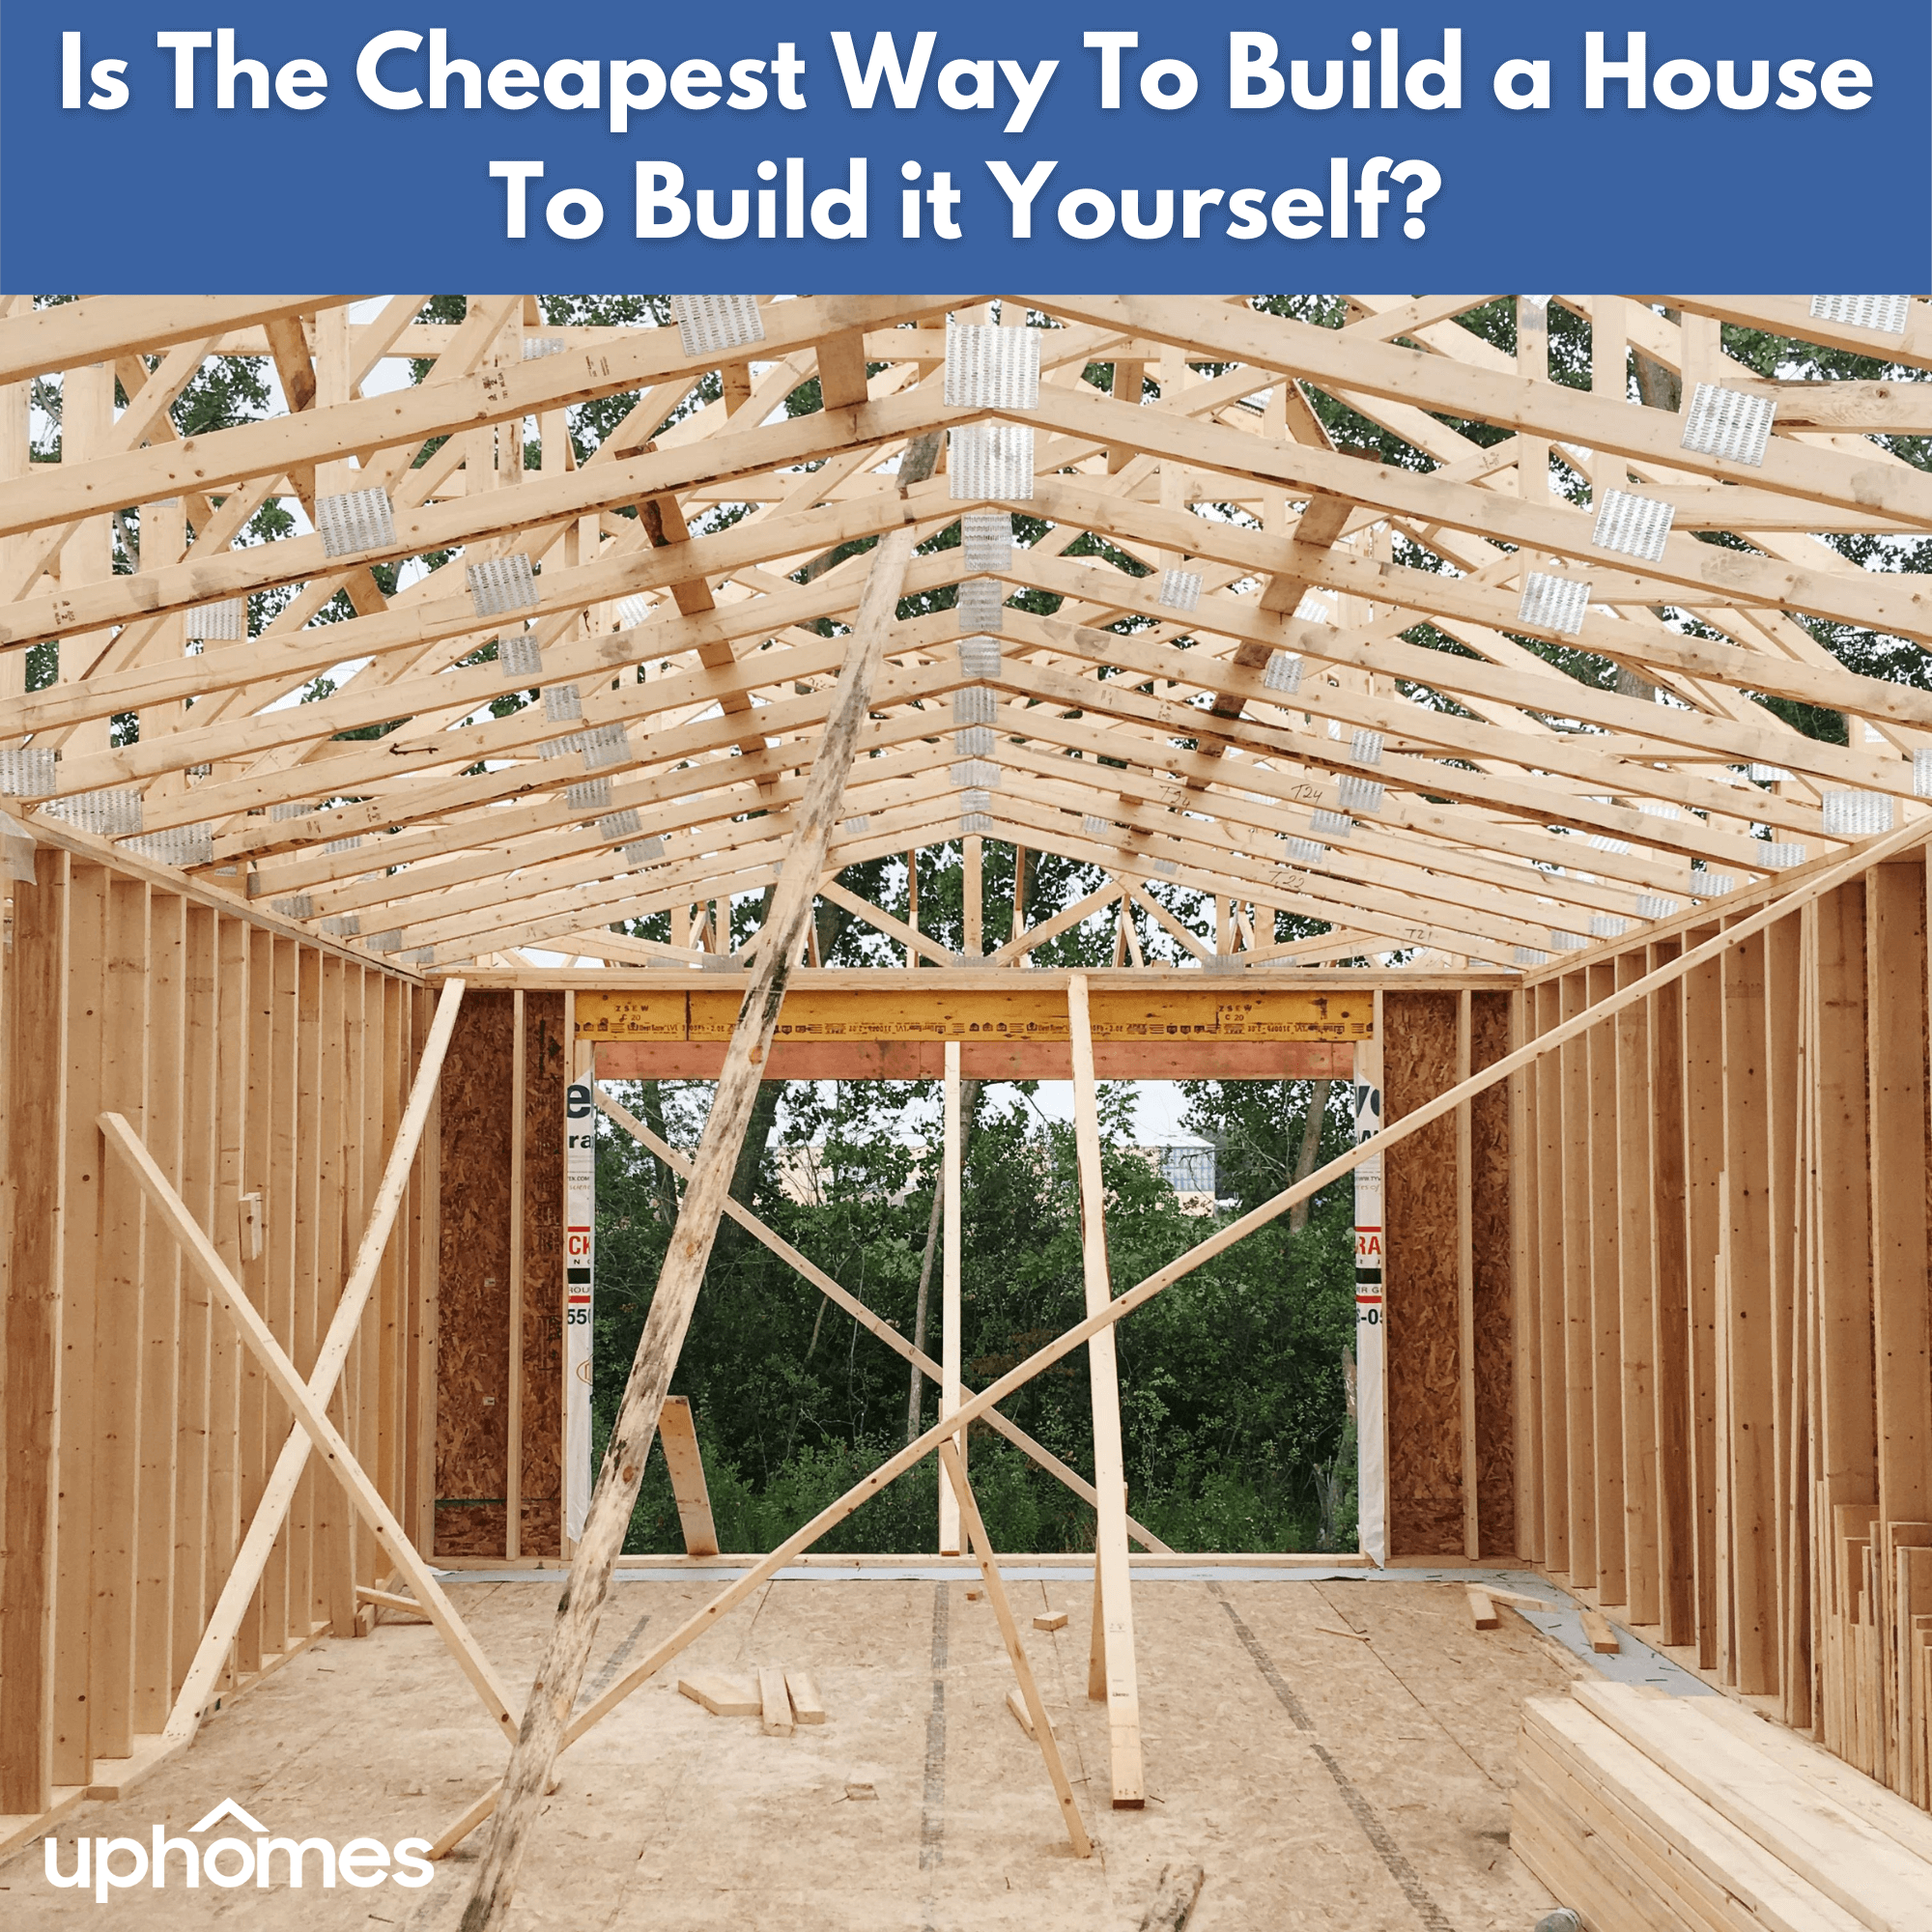 The Cheapest Way to Build a House: Build it Yourself